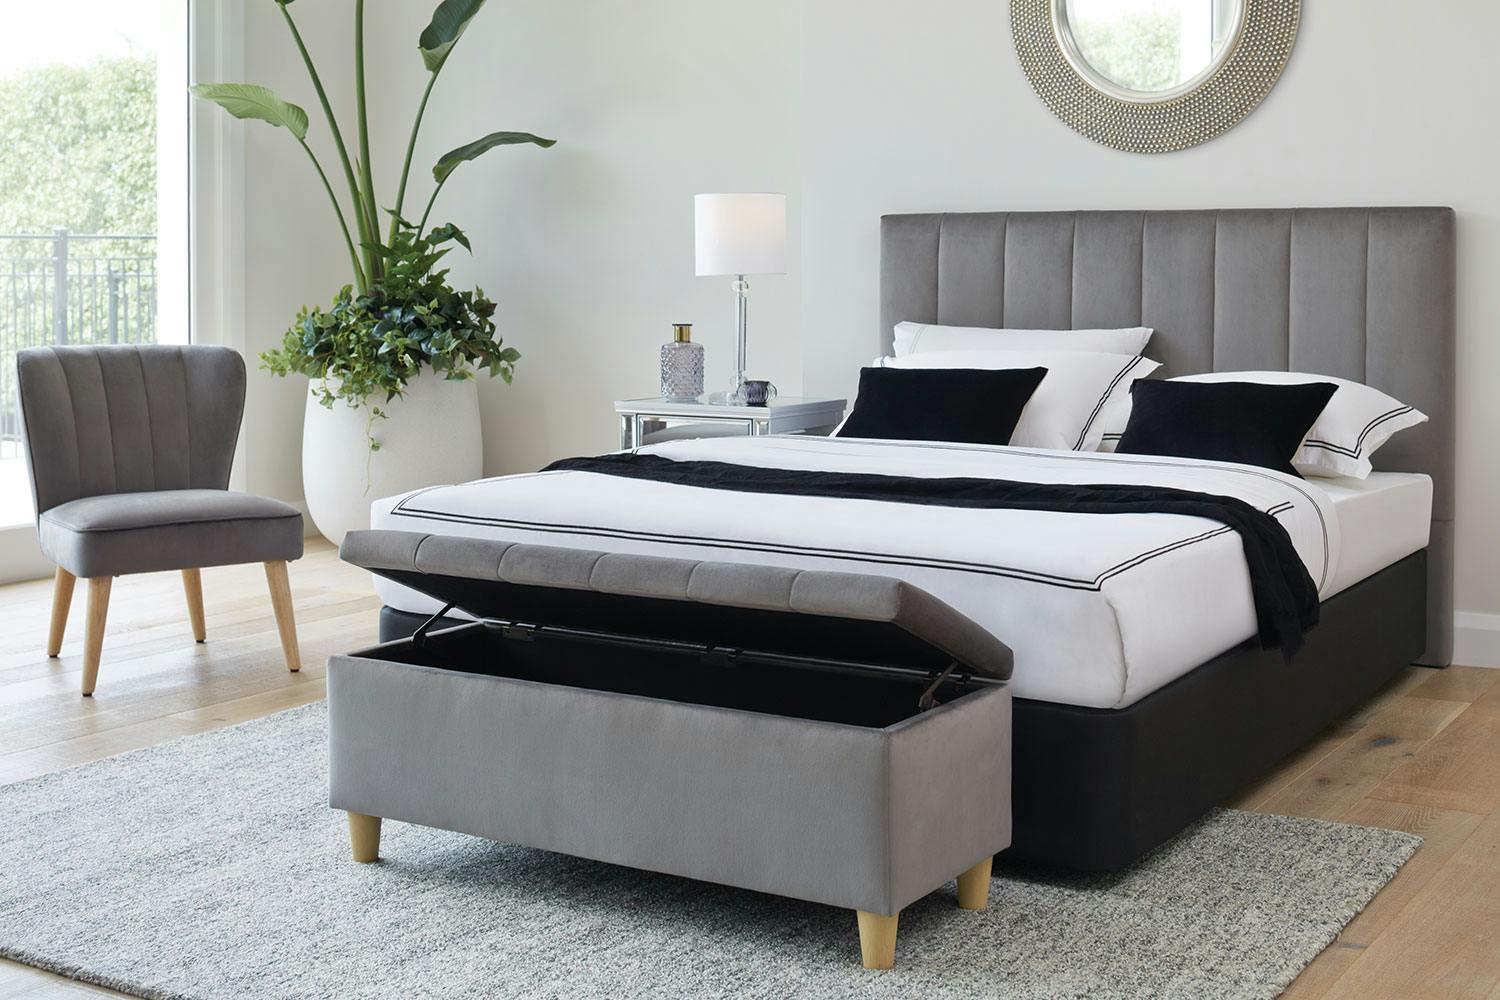 Oasis 3 Piece Bedroom Package By Nero Furniture Harvey Norman